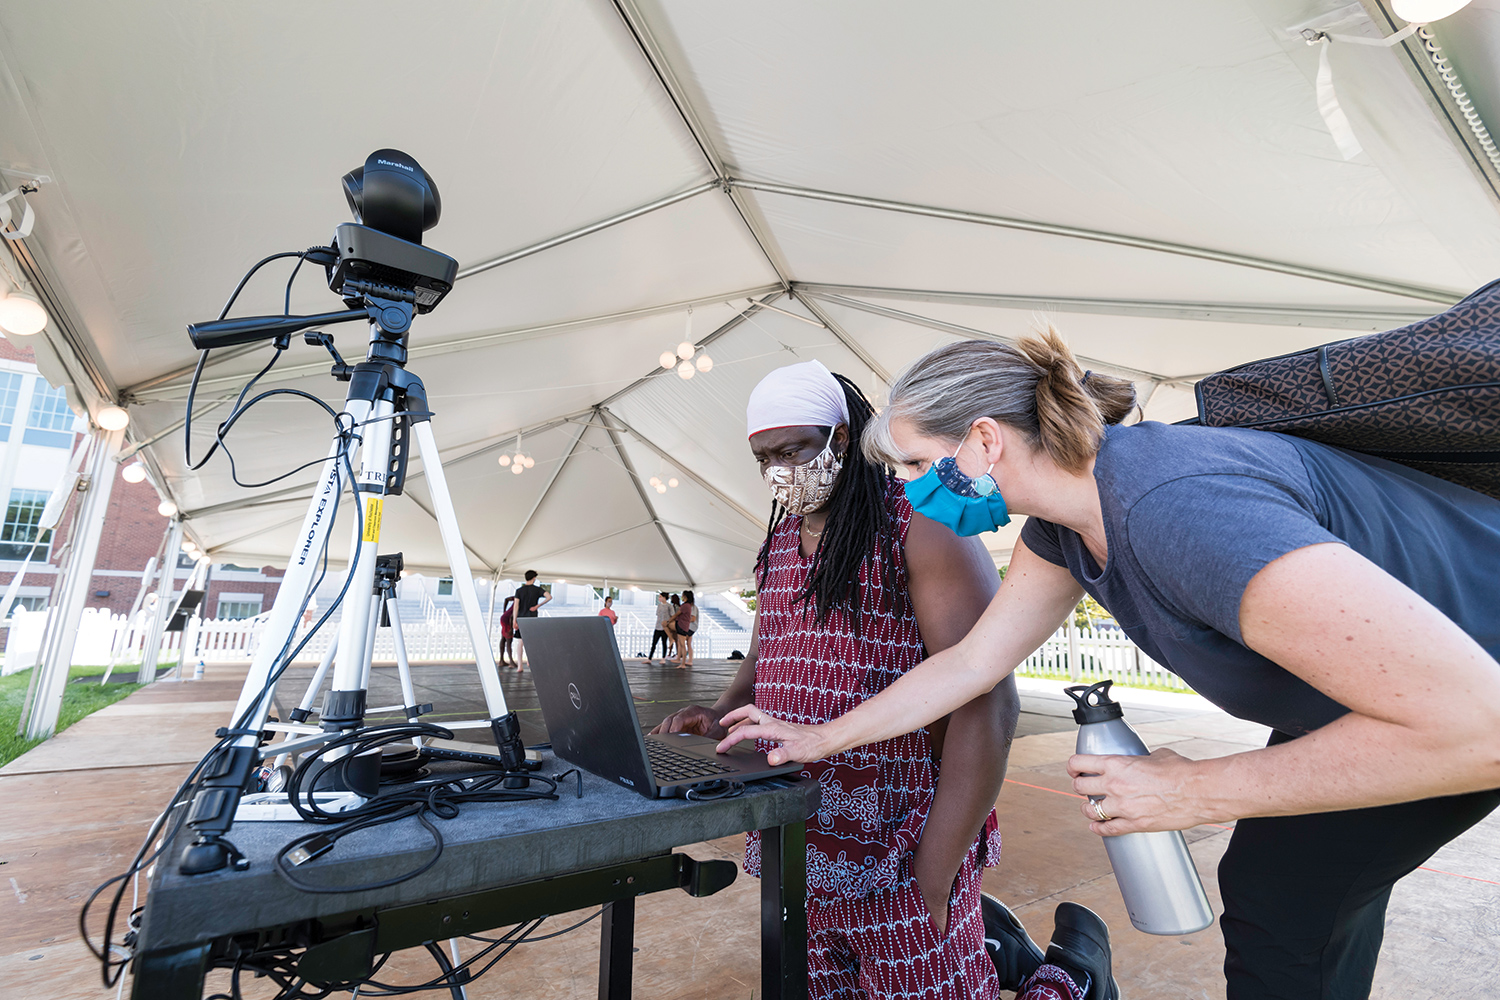 two instructors, both in masks, leaning over a laptop and camera in an outdoor tent as student dancers prepare in the background.